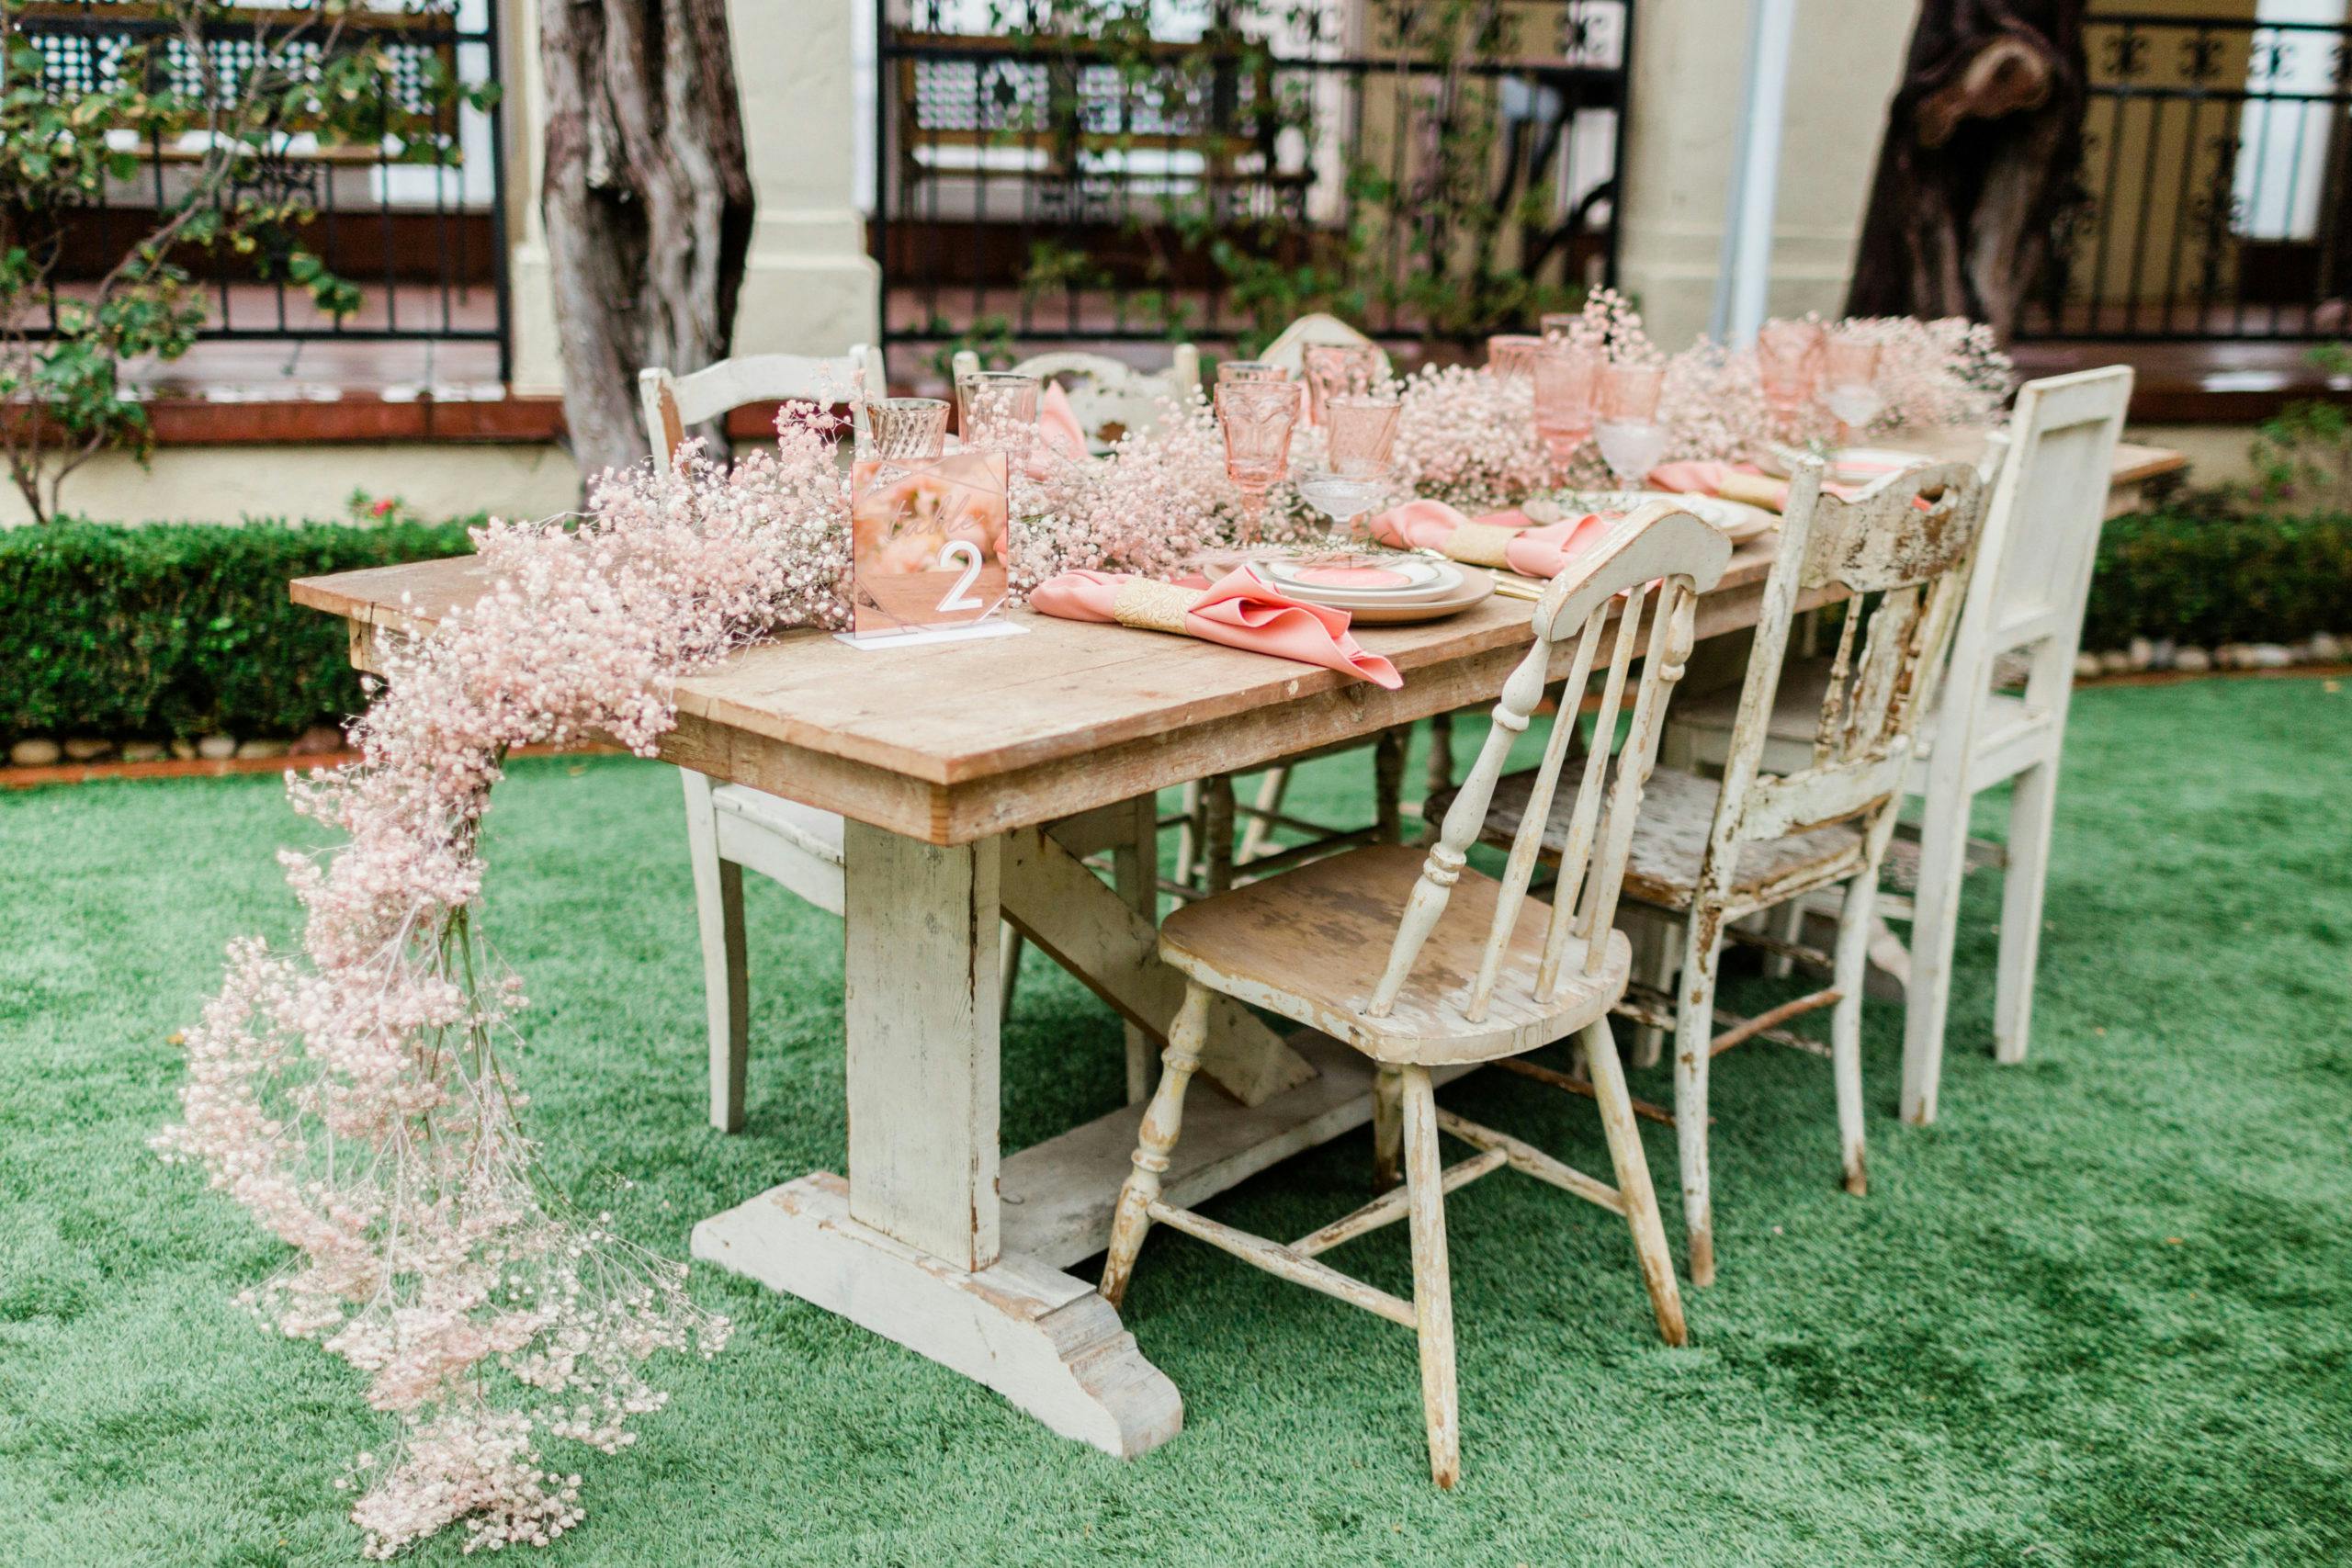 Rustic Wedding Tablescape With Pink Baby’s Breath Centerpiece Cascading Off Table | PartySlate